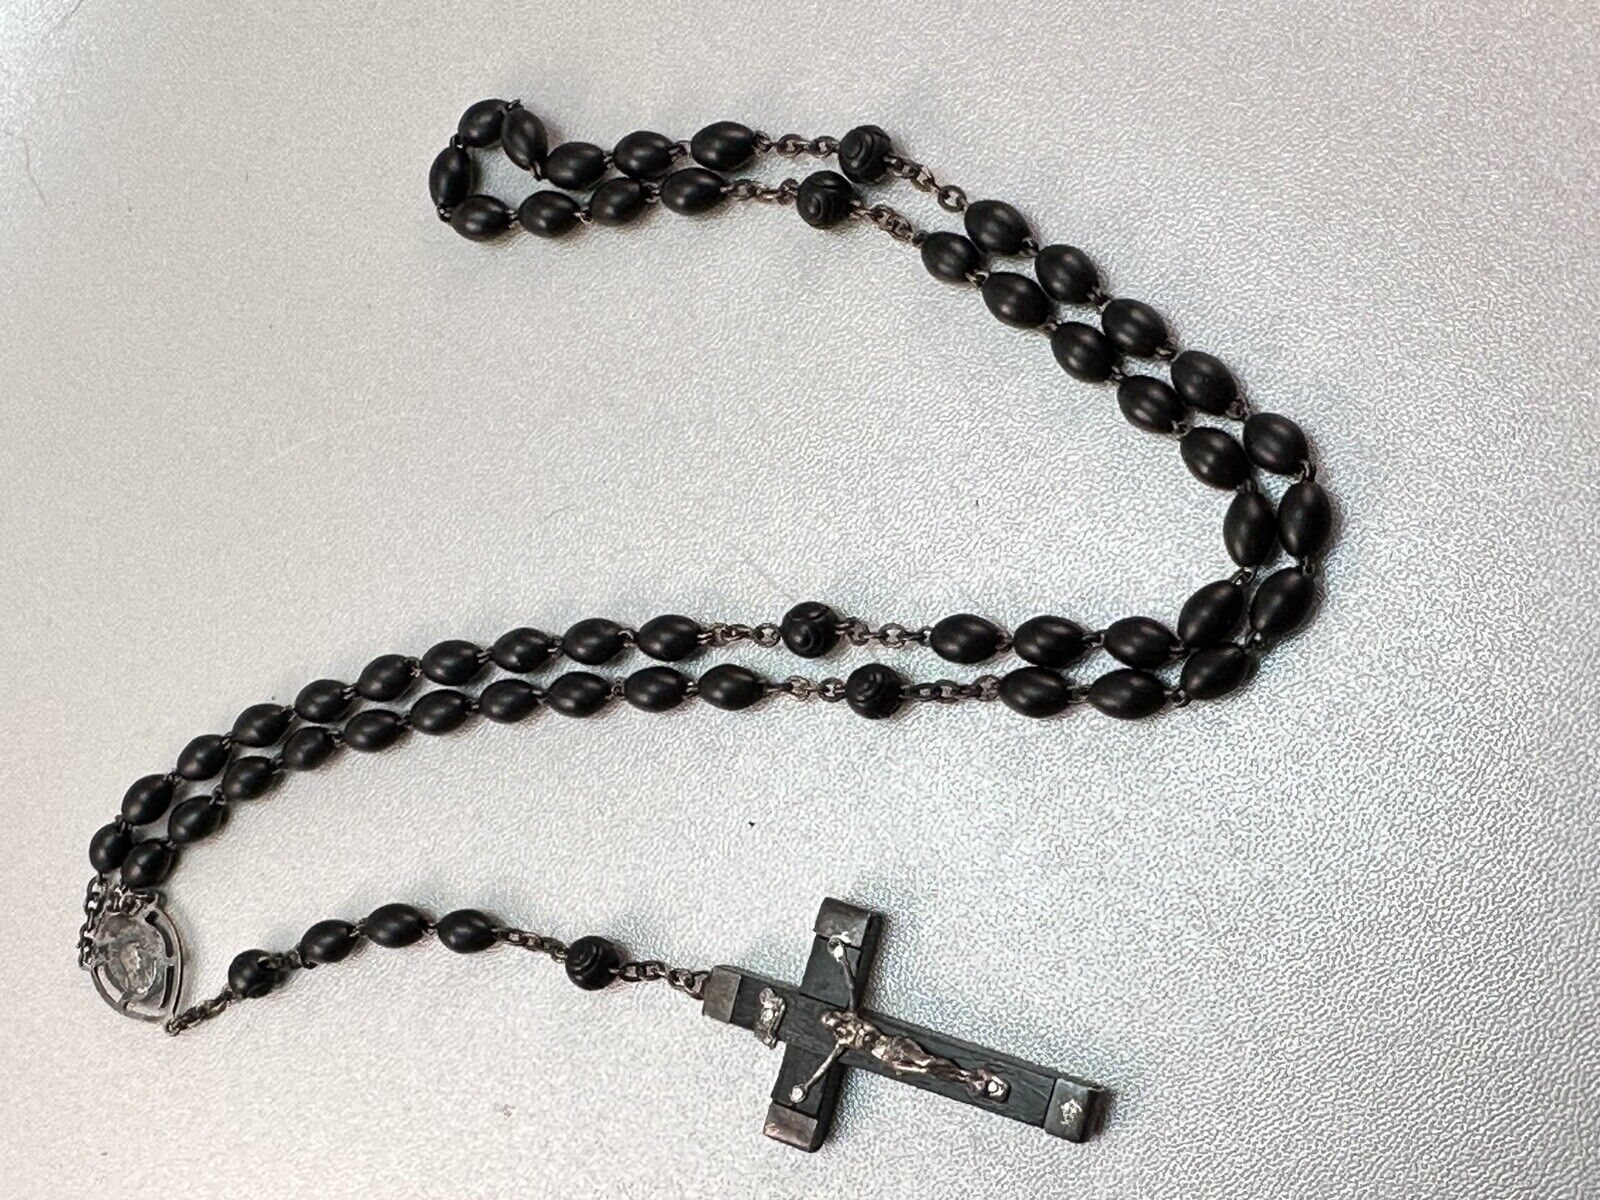 Fabulous Rosary Sterling silver and carved black ebony beads Italian sterling